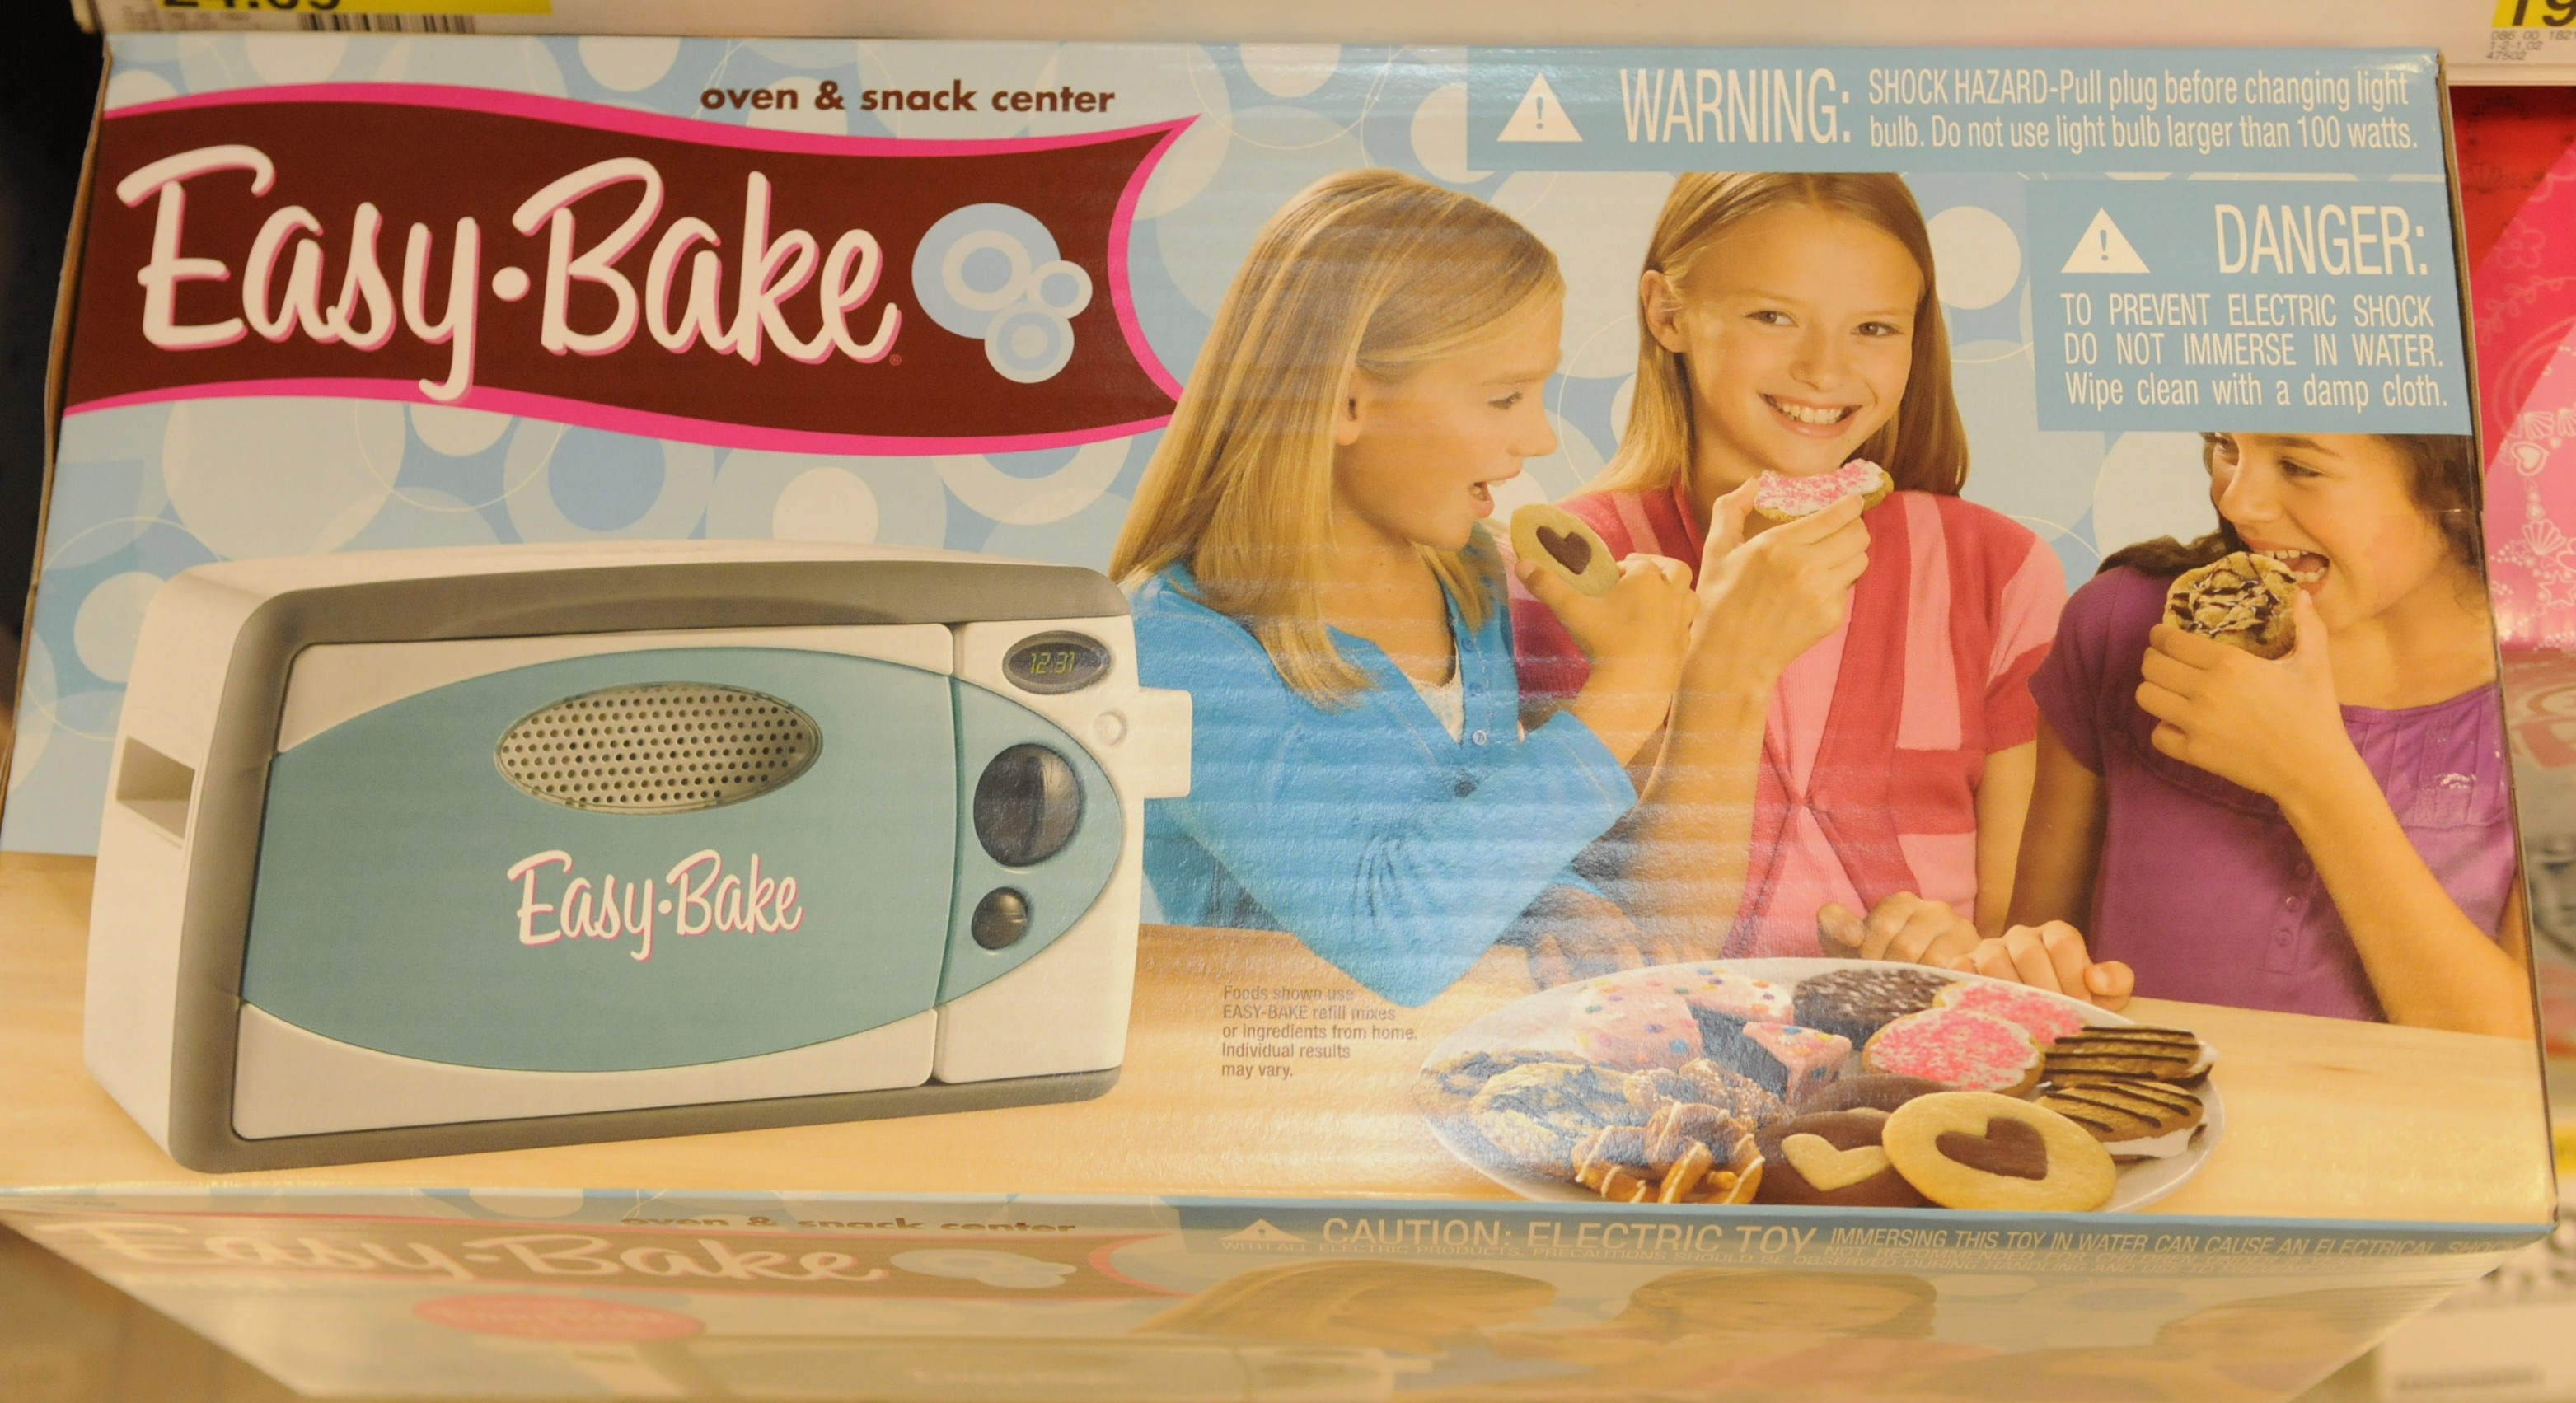 Photo by Tim Leedy 12/2/10Toys at Target.Easy Bake oven